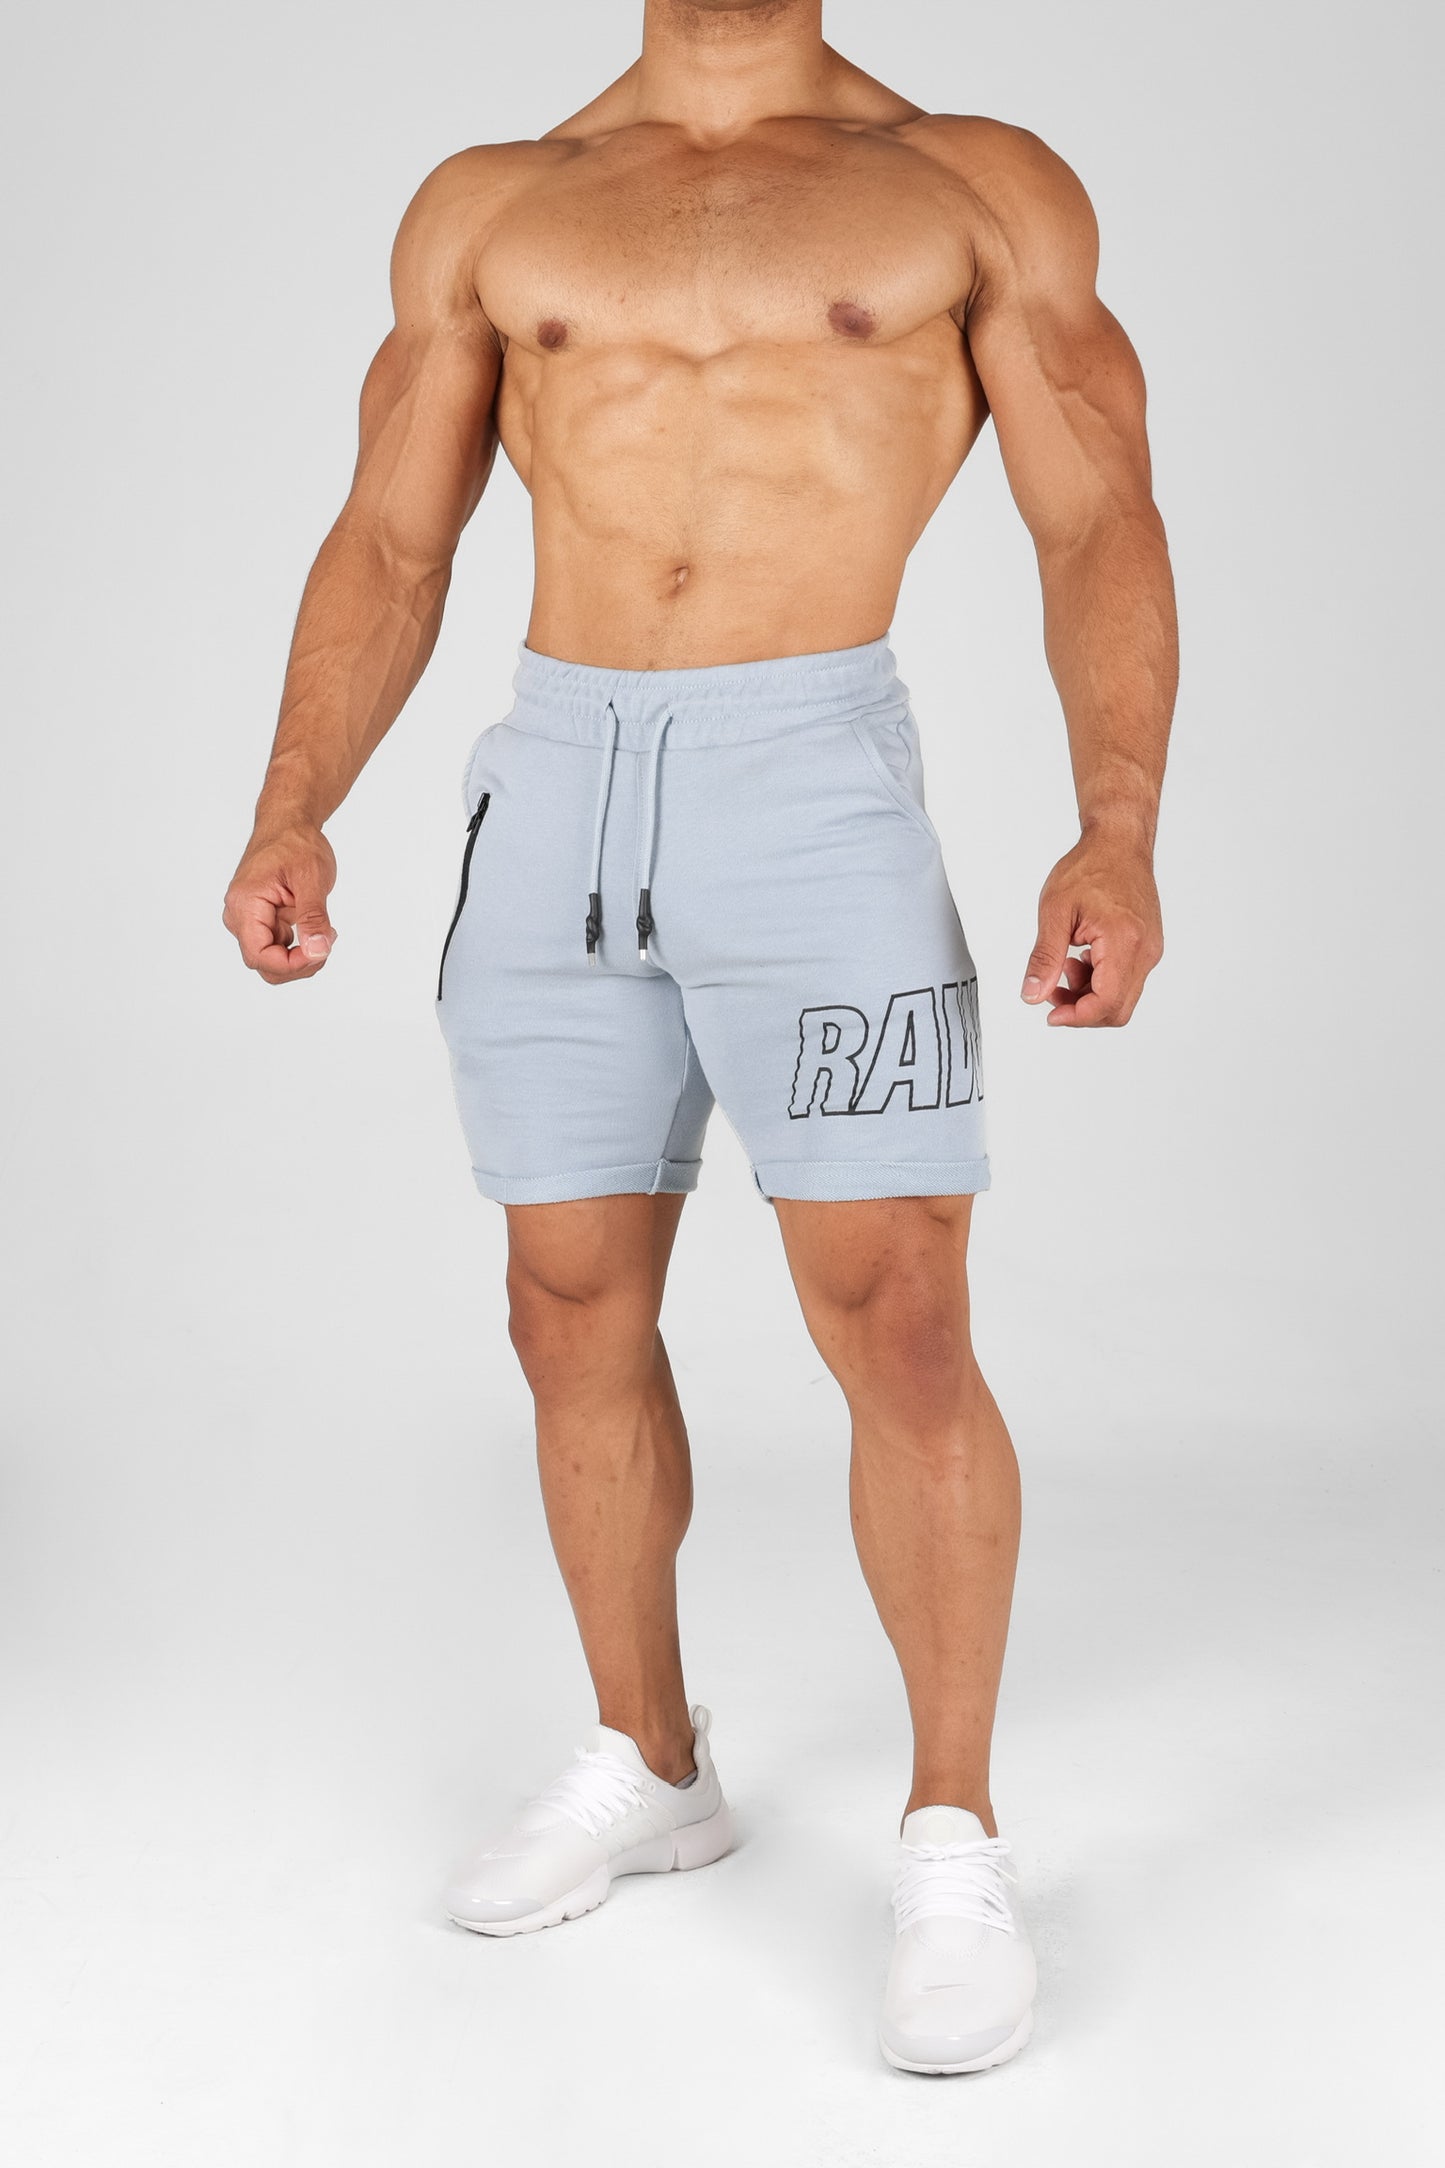 Raw Front Shorts